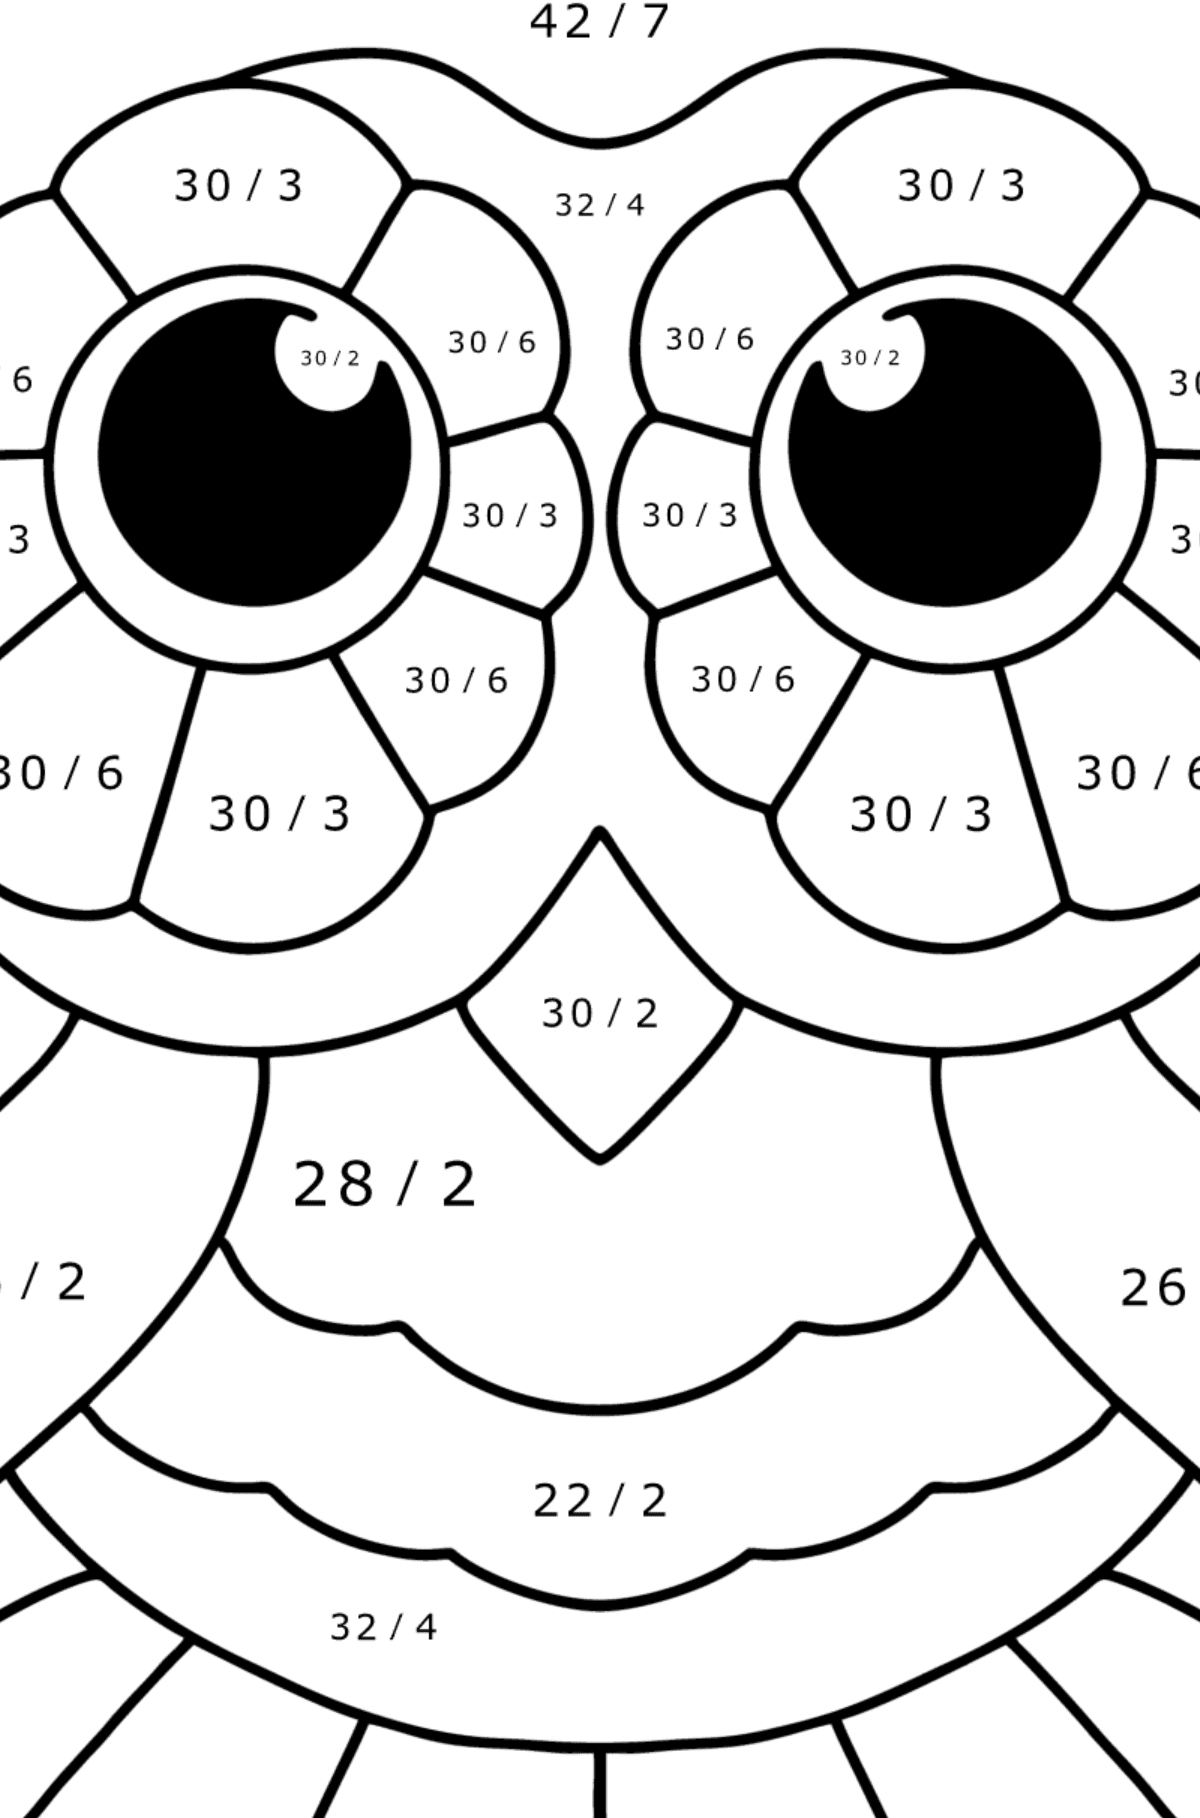 Easy stress relief coloring page - Owl - Math Coloring - Division for Kids